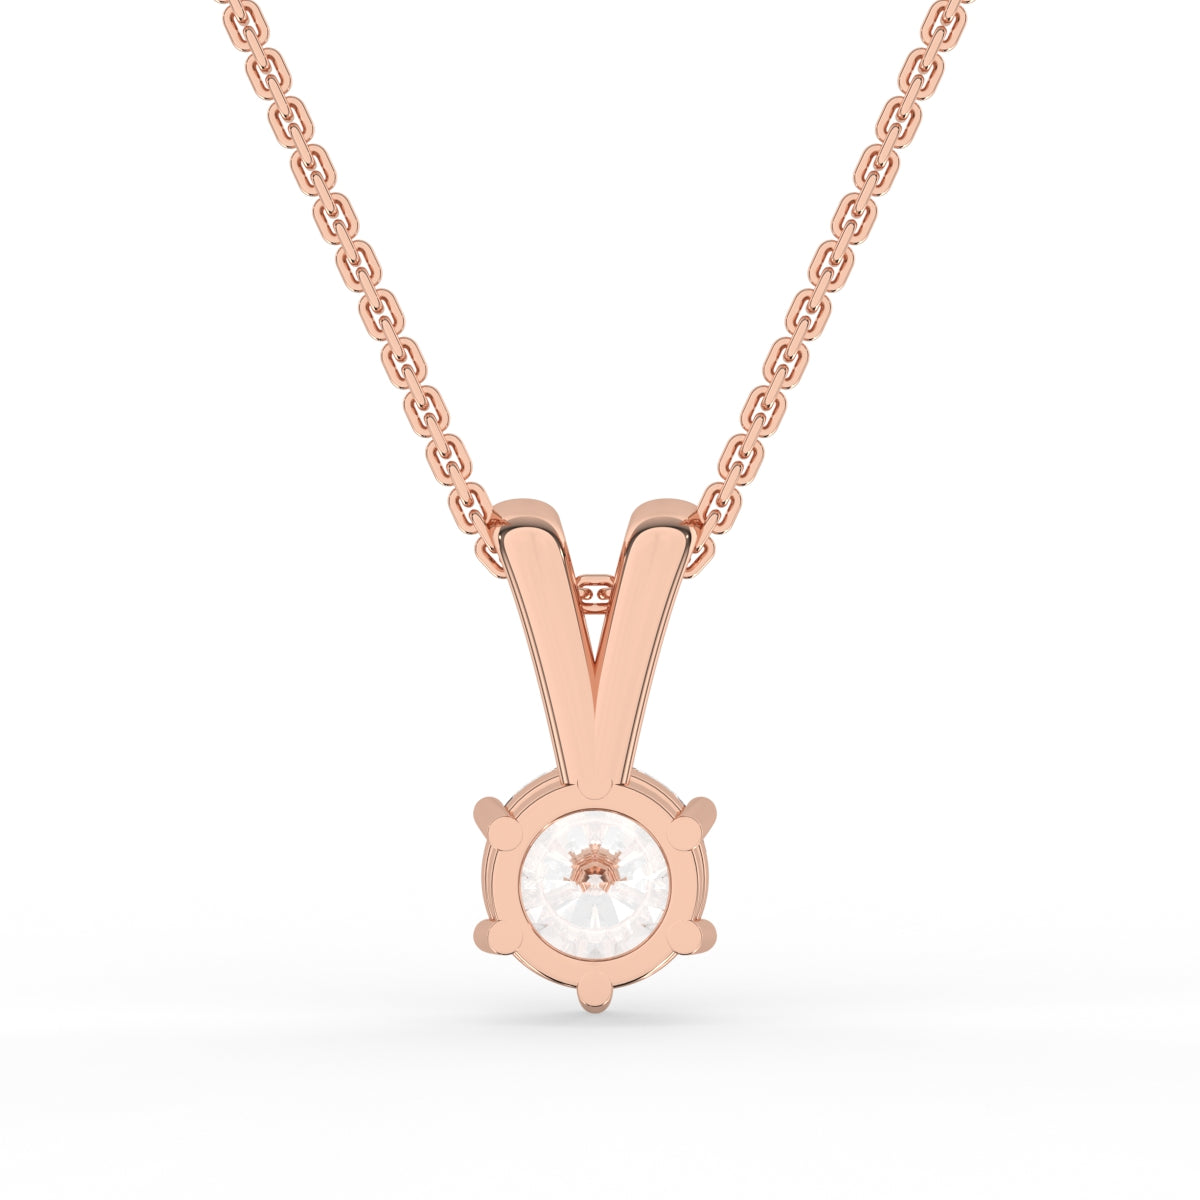 Forever One Soliaire Diamond Pendant For Her